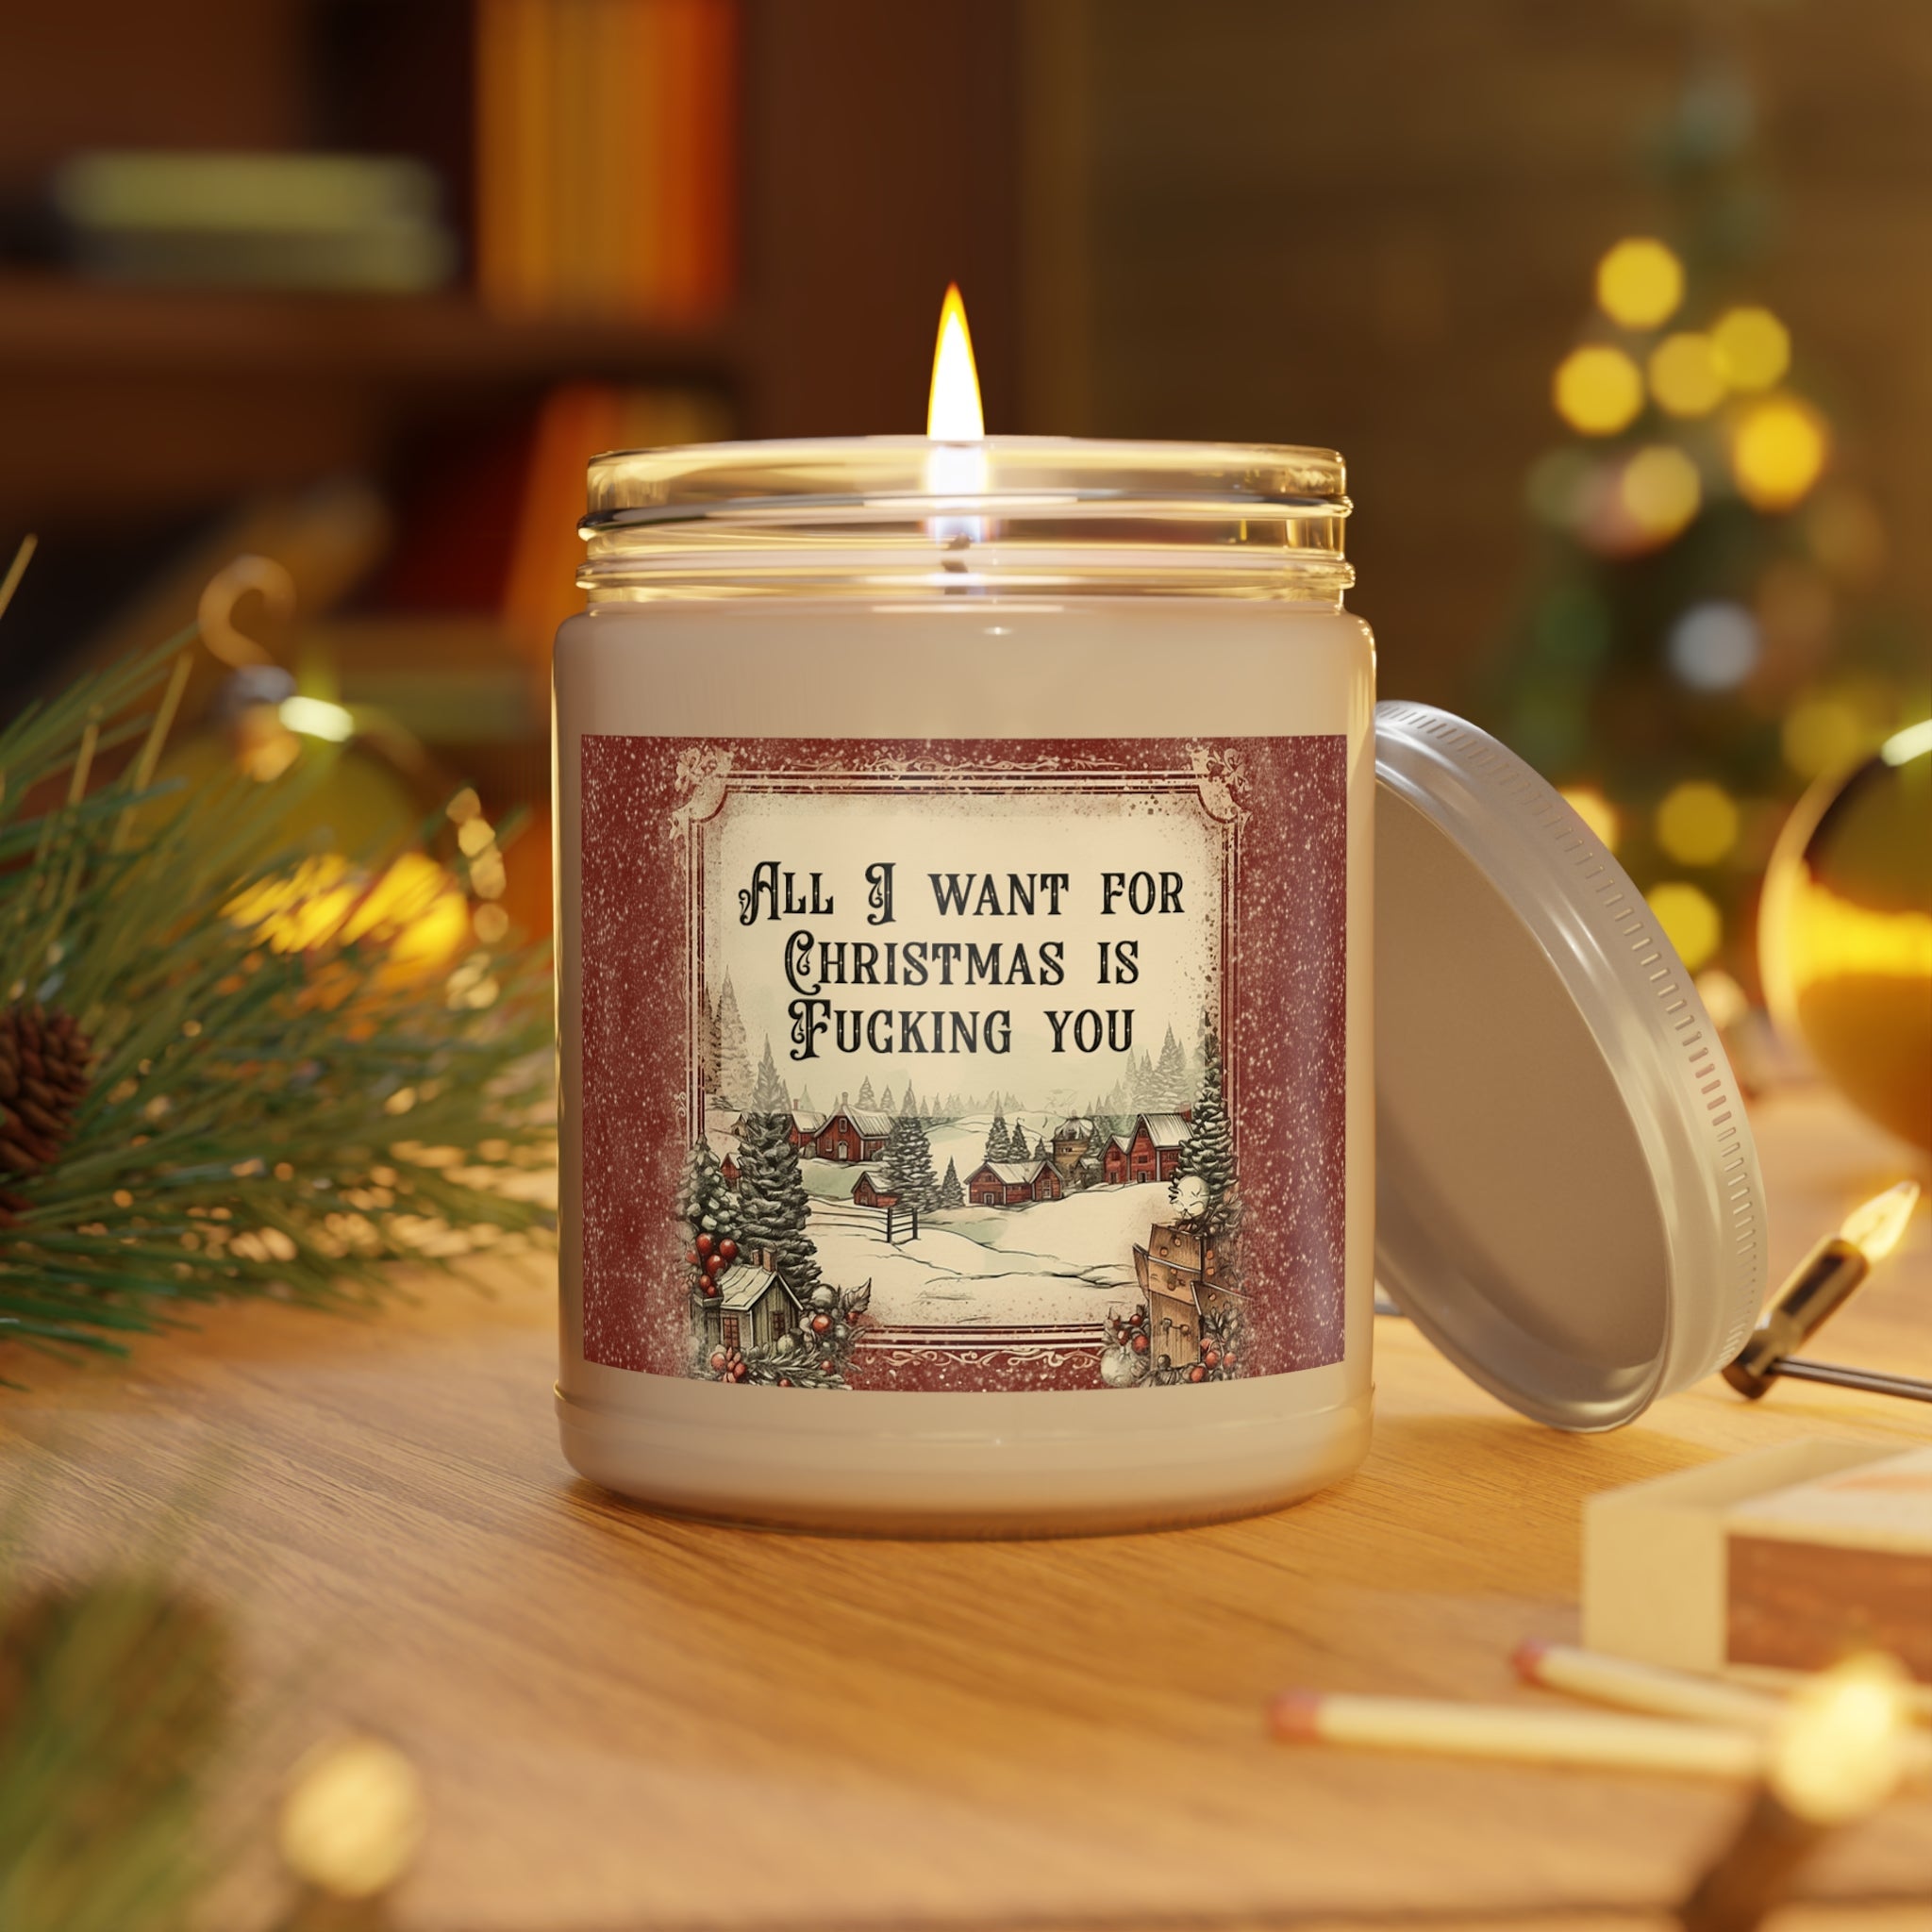 All I want for Christmas is Fucking you - Scented Candles, 9oz